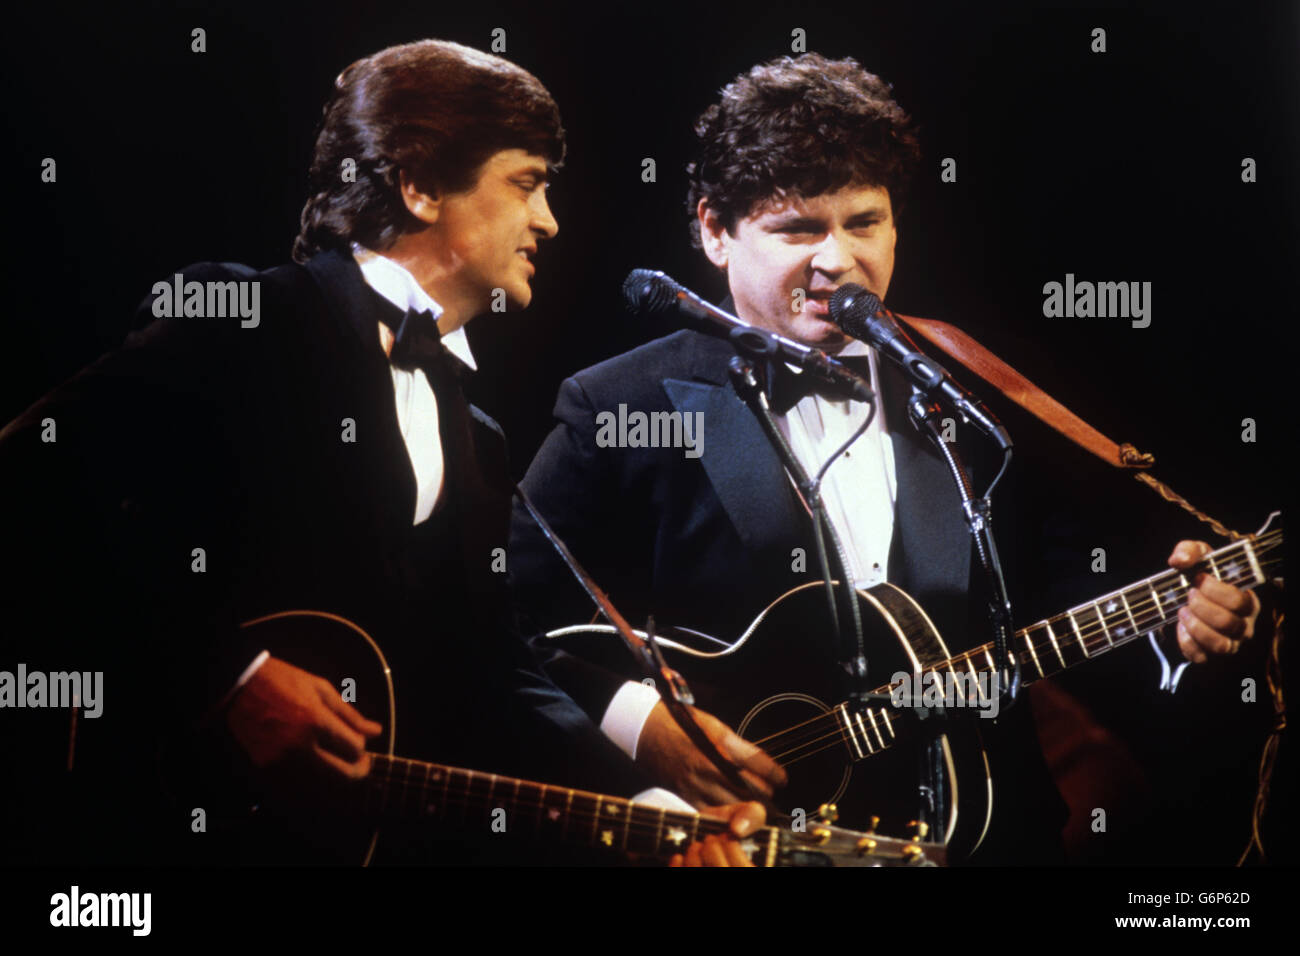 Phil (l) and Don Everly, the American rock duo of the 1950s and 1960s, performing at the Royal Albert Hall, London. The concert was their first together in 10 years. Stock Photo